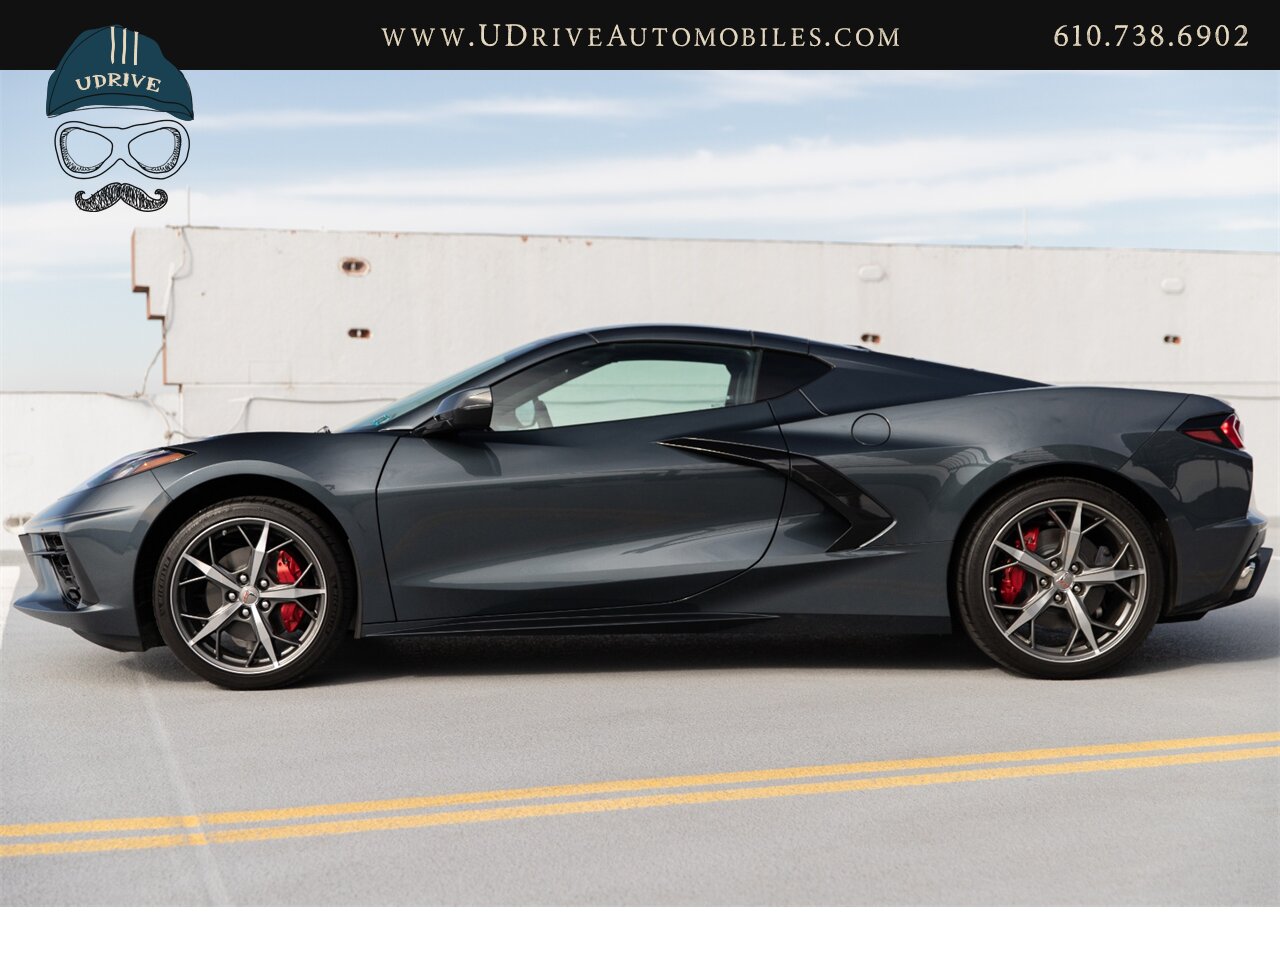 2020 Chevrolet Corvette Stingray 2LT GT2 Bucket Seats Front Lift  Red Calipers Two Tone Seats Red Lthr - Photo 13 - West Chester, PA 19382